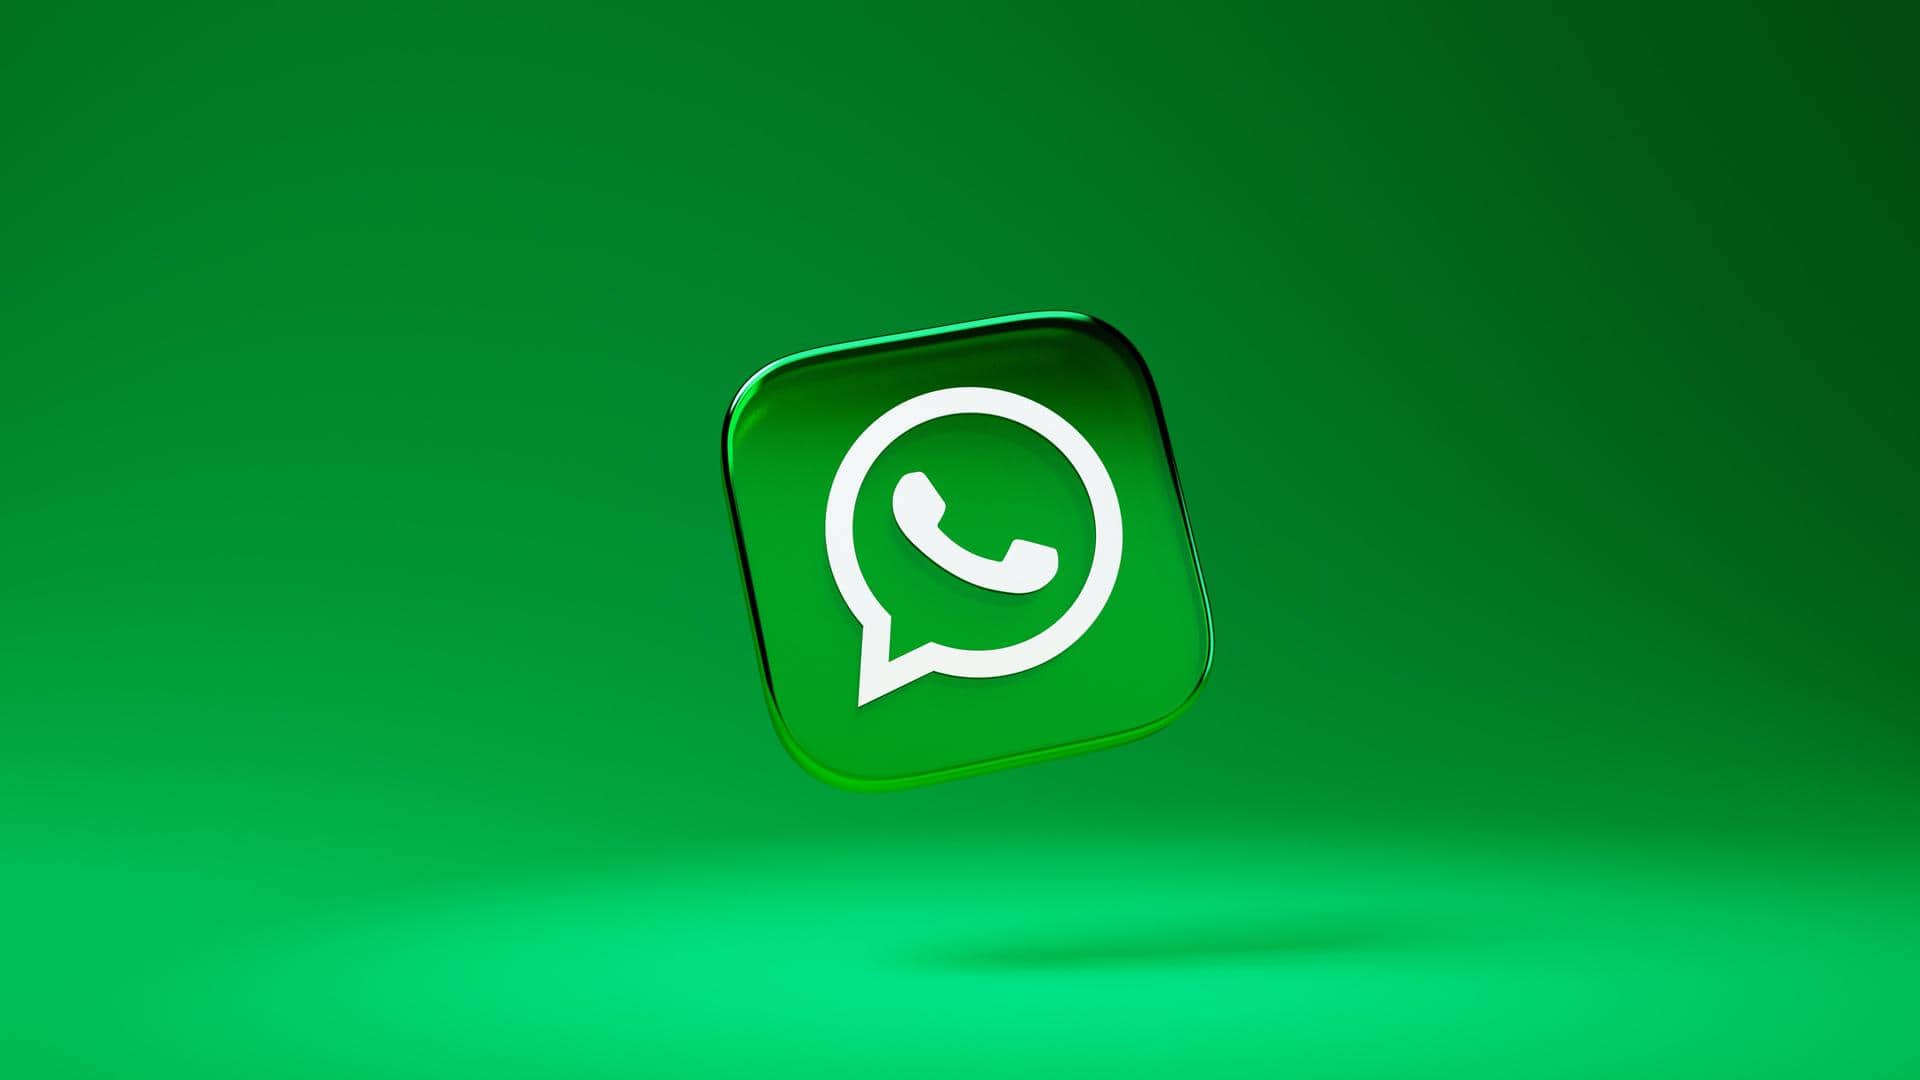 WhatsApp update for iOS, Android: Check what's new